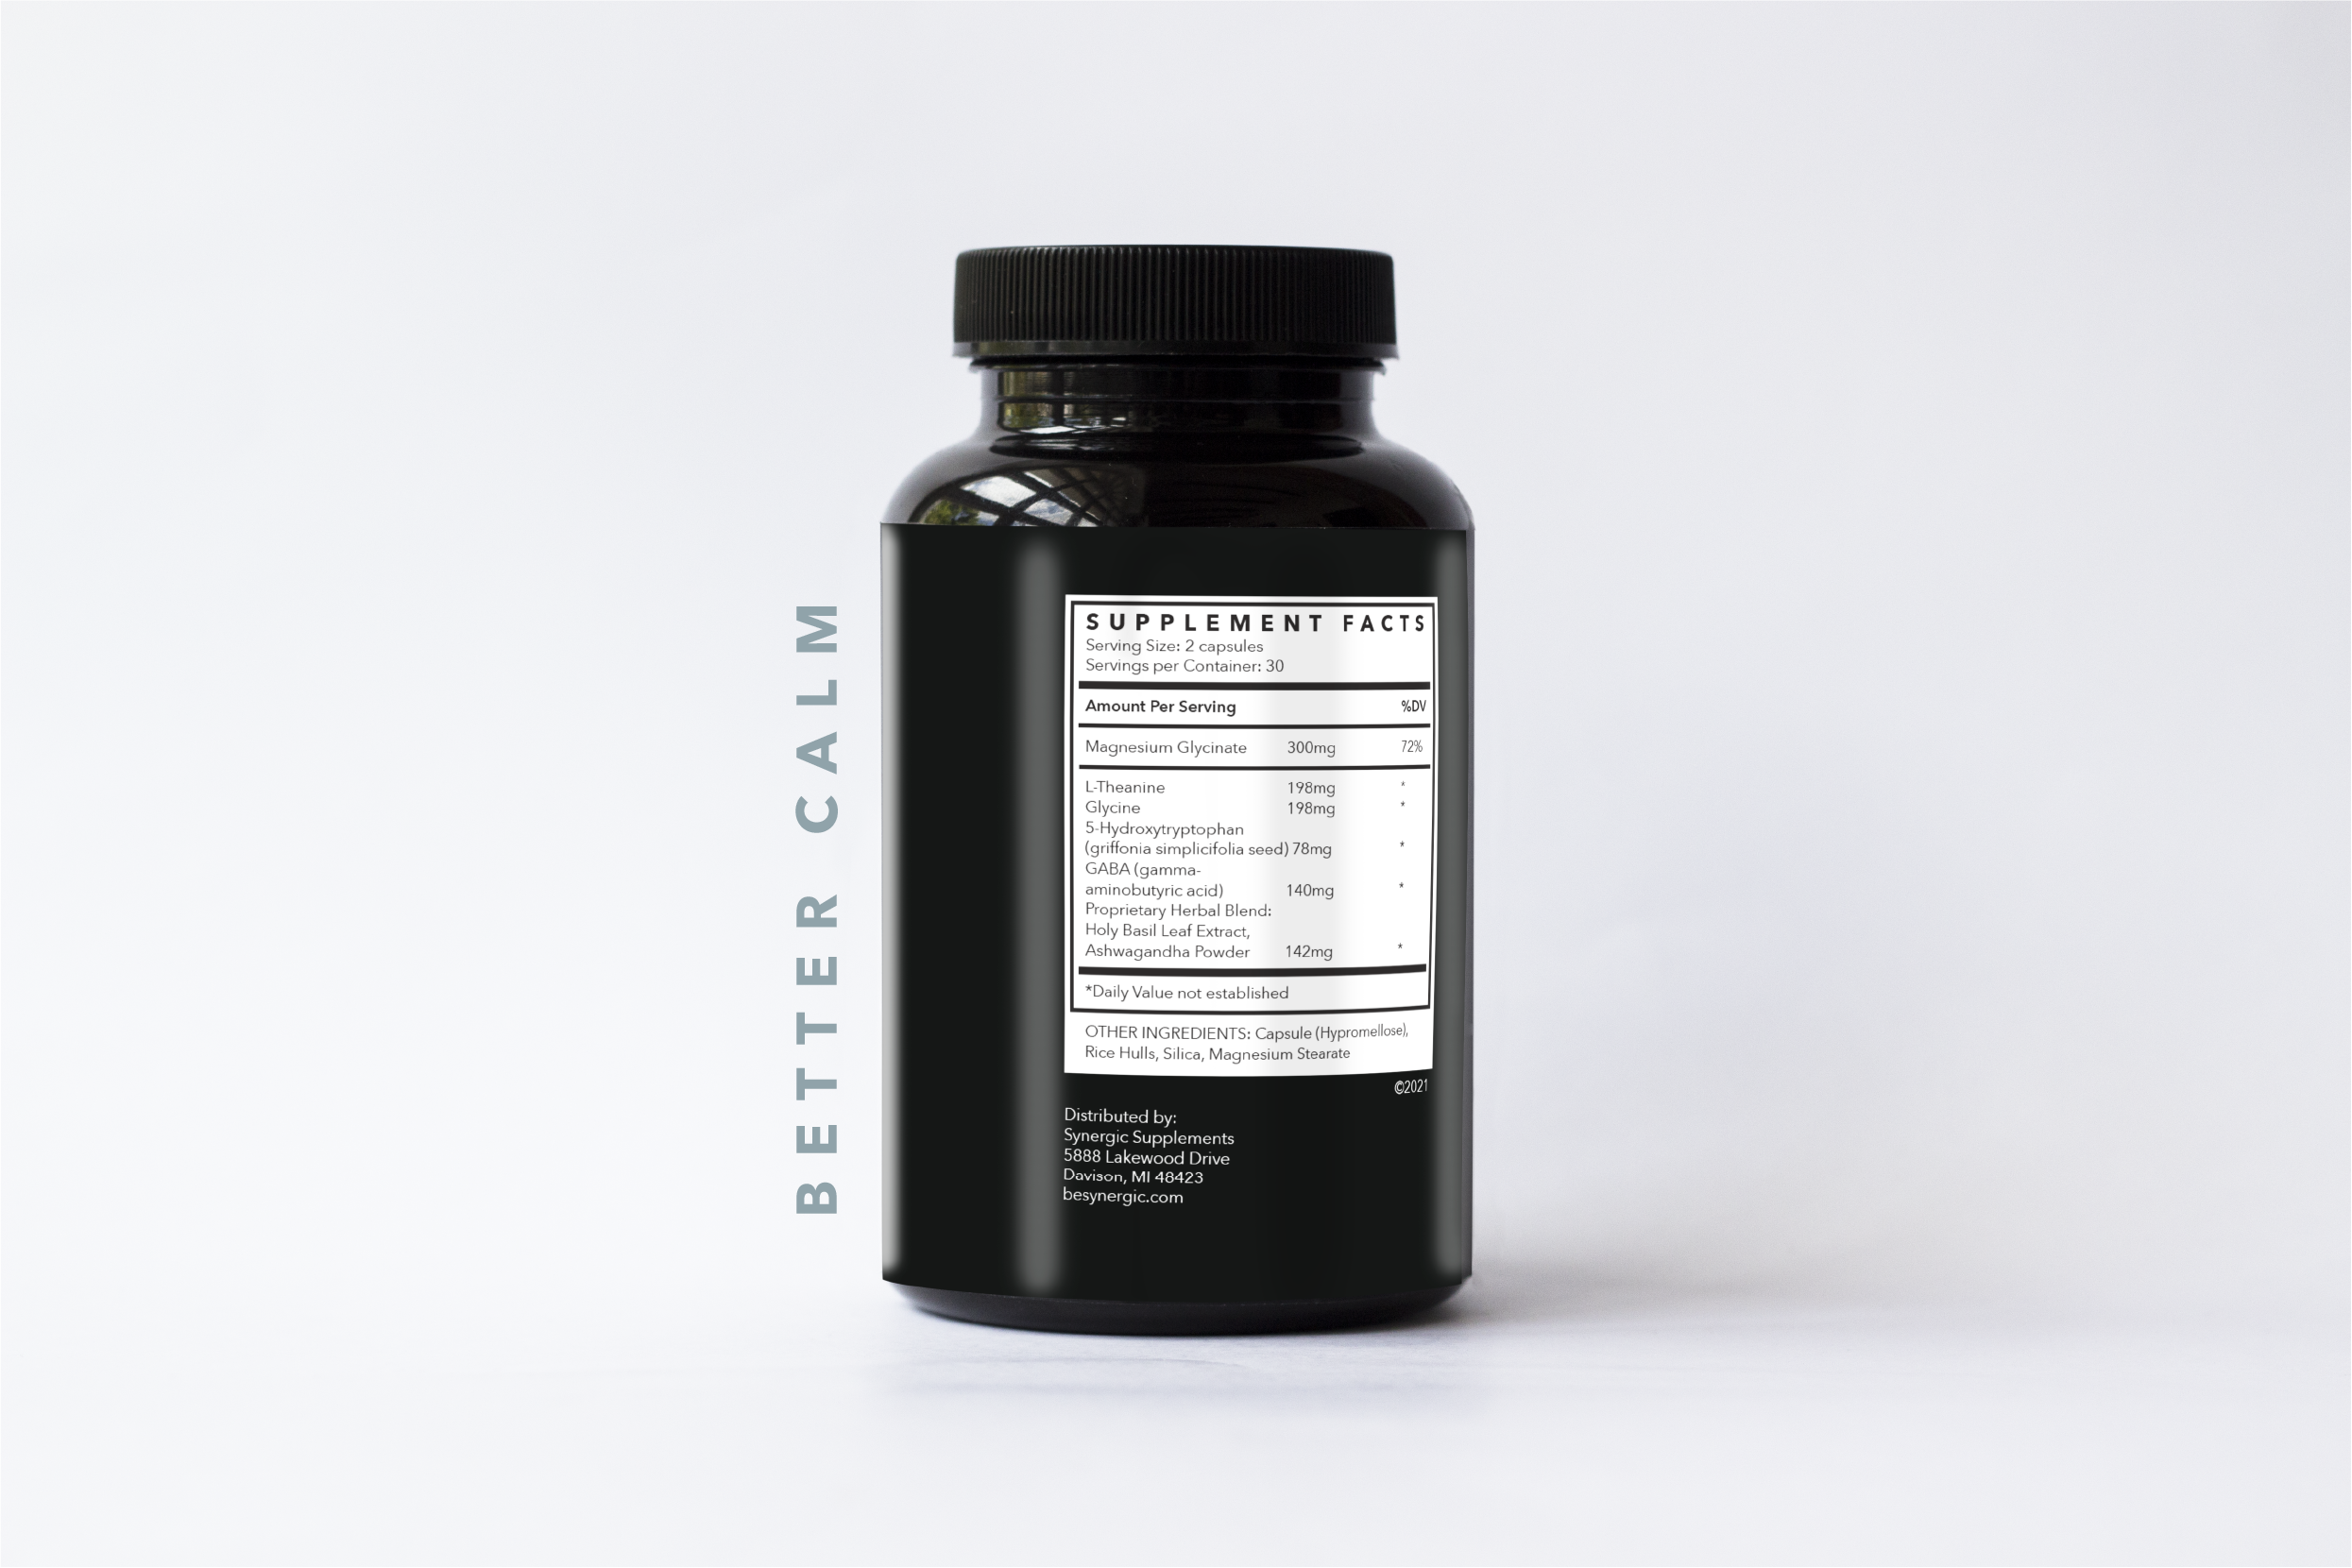 Supplement Facts of Better Calm Supplement/Balancer bottle by Synergic Supplements. Serving size: 2 capsules, Serving Size per Container: 30 Contains Magnesium Glycinate 300mg, L-Theanine 198mg, Glycine 198mg, 5-Hydroxytryptophan 78mg, GABA 140mg, Propriety Herbal Blend: Holy basil and Ashwagandha Powder 142mg. Other ingredients: Capsule (hypromellose), Rice Hulls, Silica, Magnesium. Stearate Distributed by Synergic Supplements